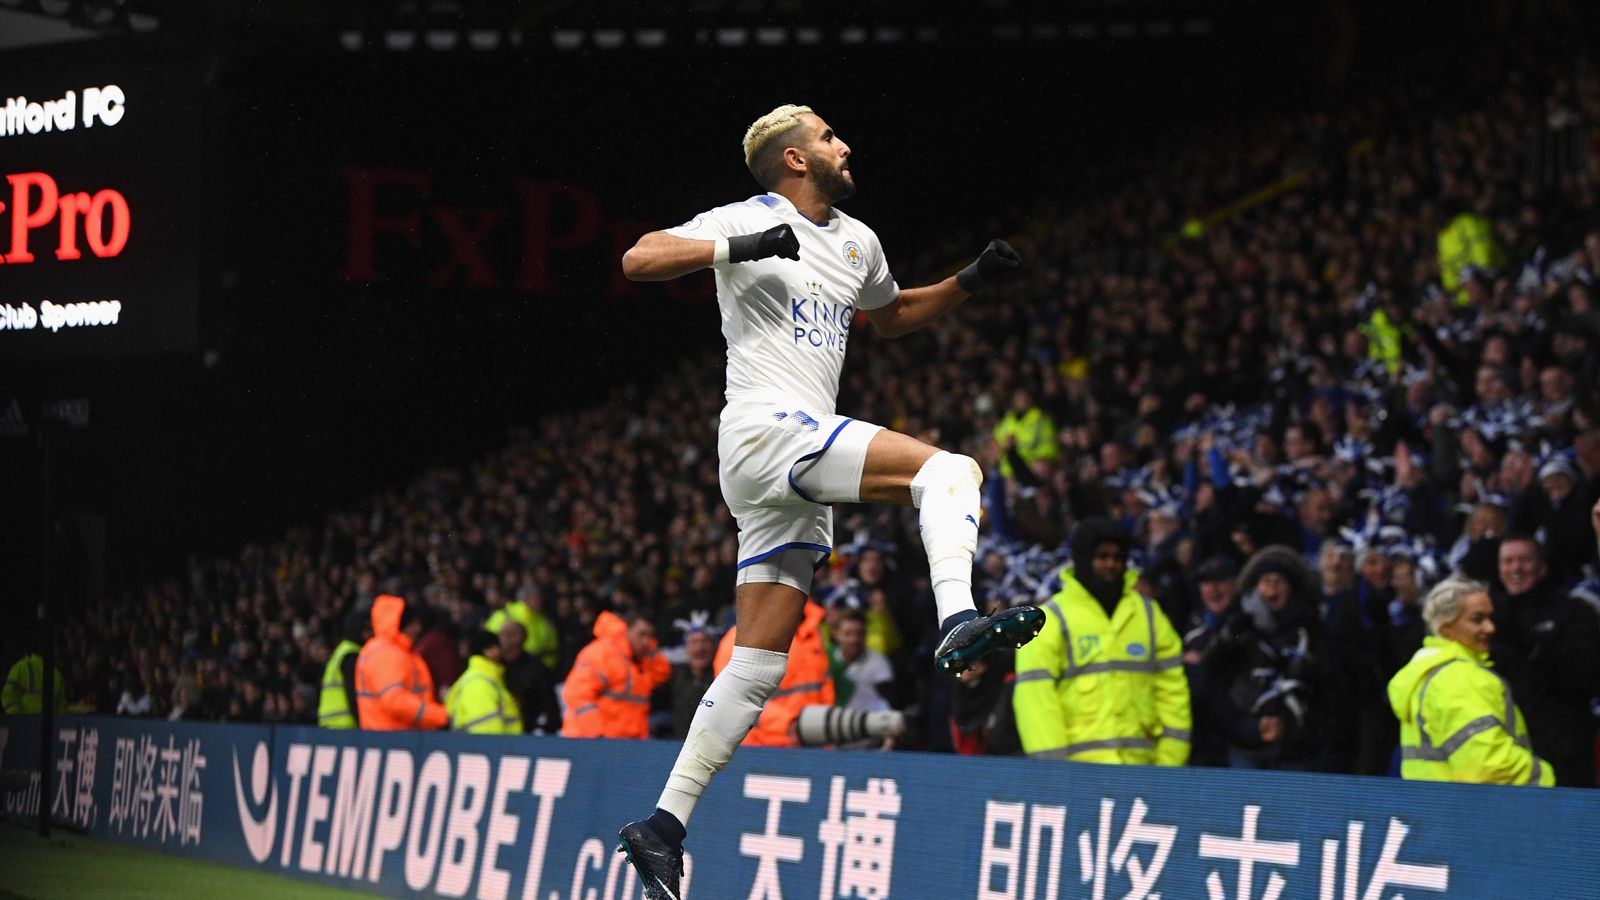 Leicester S Riyad Mahrez Could Cost 100m In The Summer Says Claude Puel Football News Sky Sports